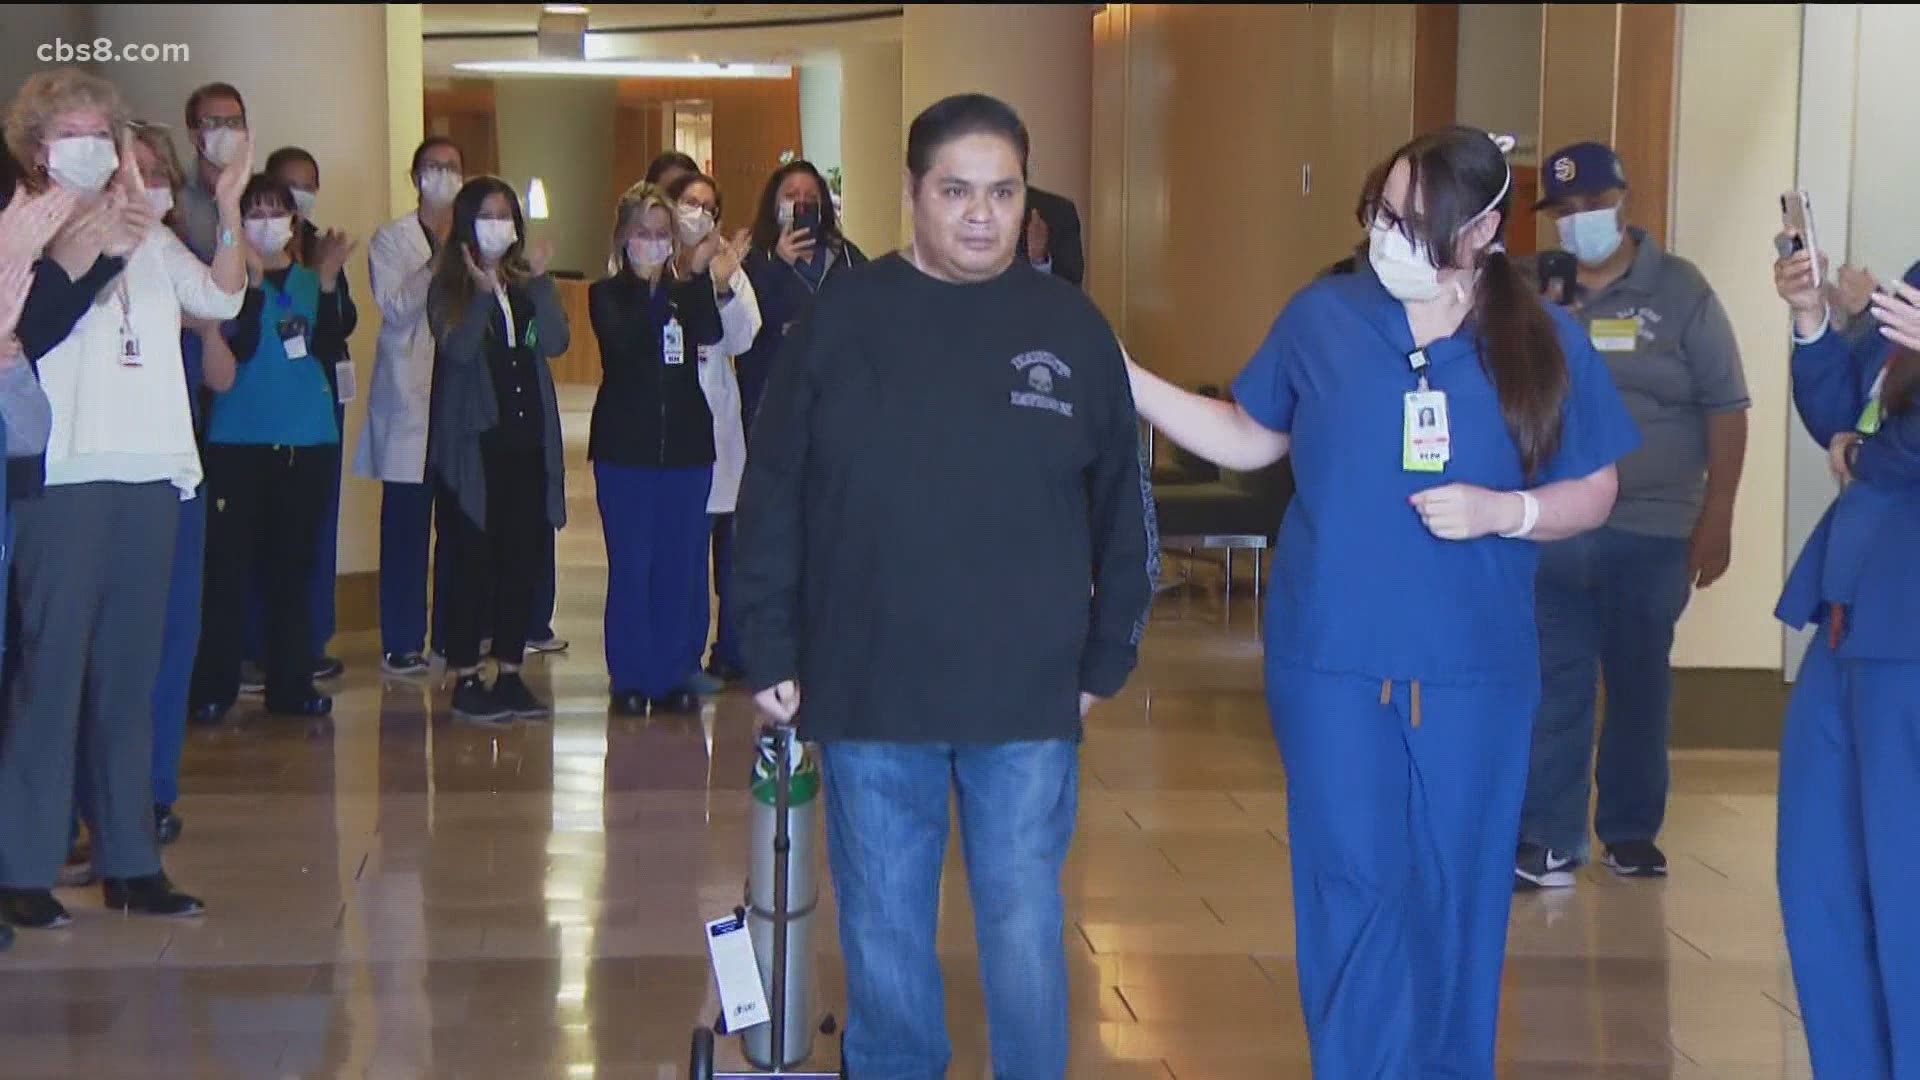 A parade of nurses and healthcare workers cheered for Daniel Plata as he was released after being hospitalized for nearly three months.